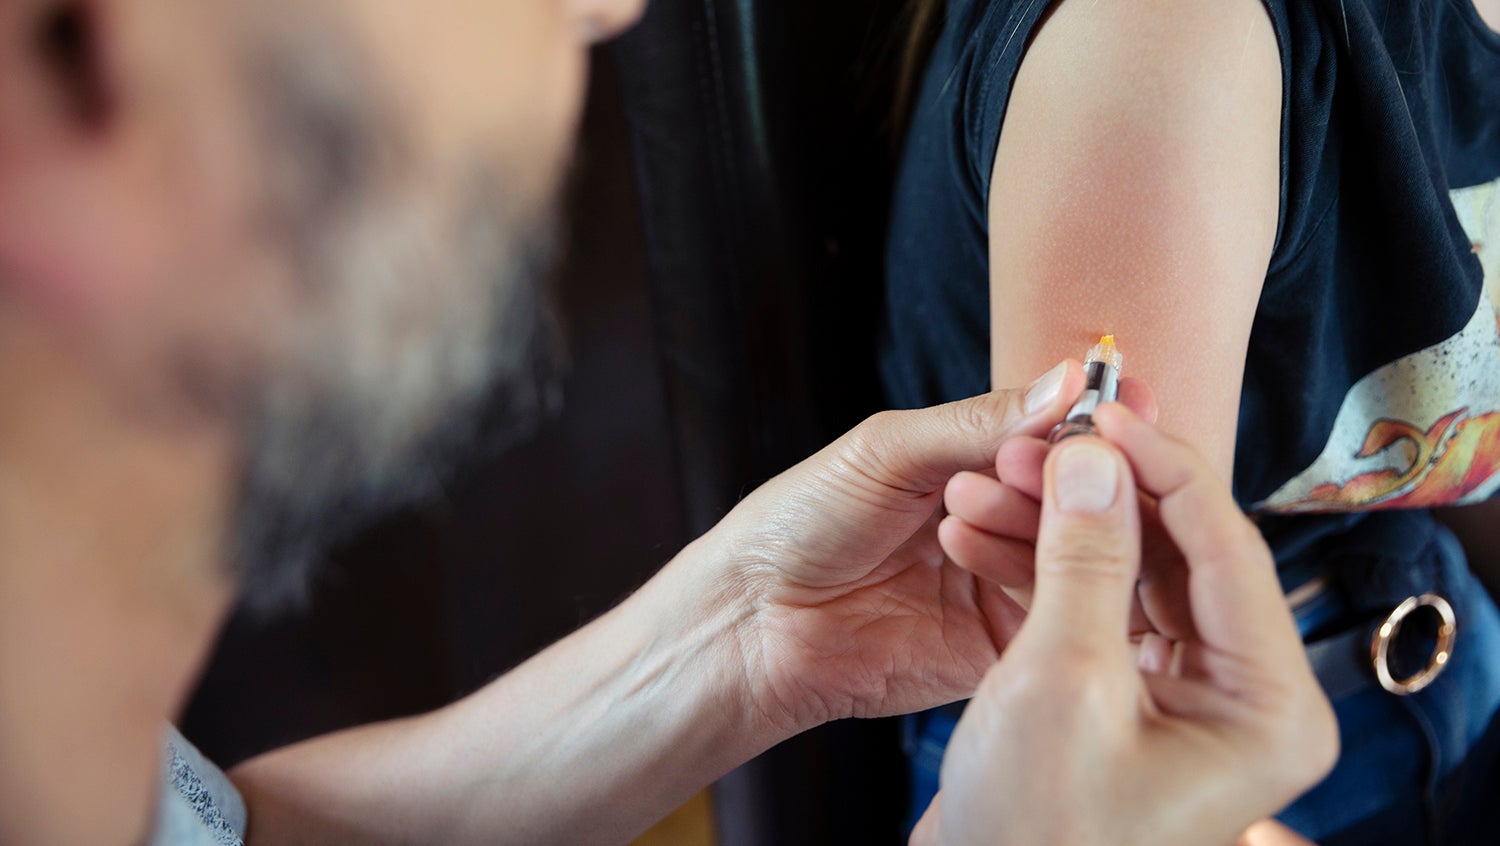 HPV vaccine shot administered